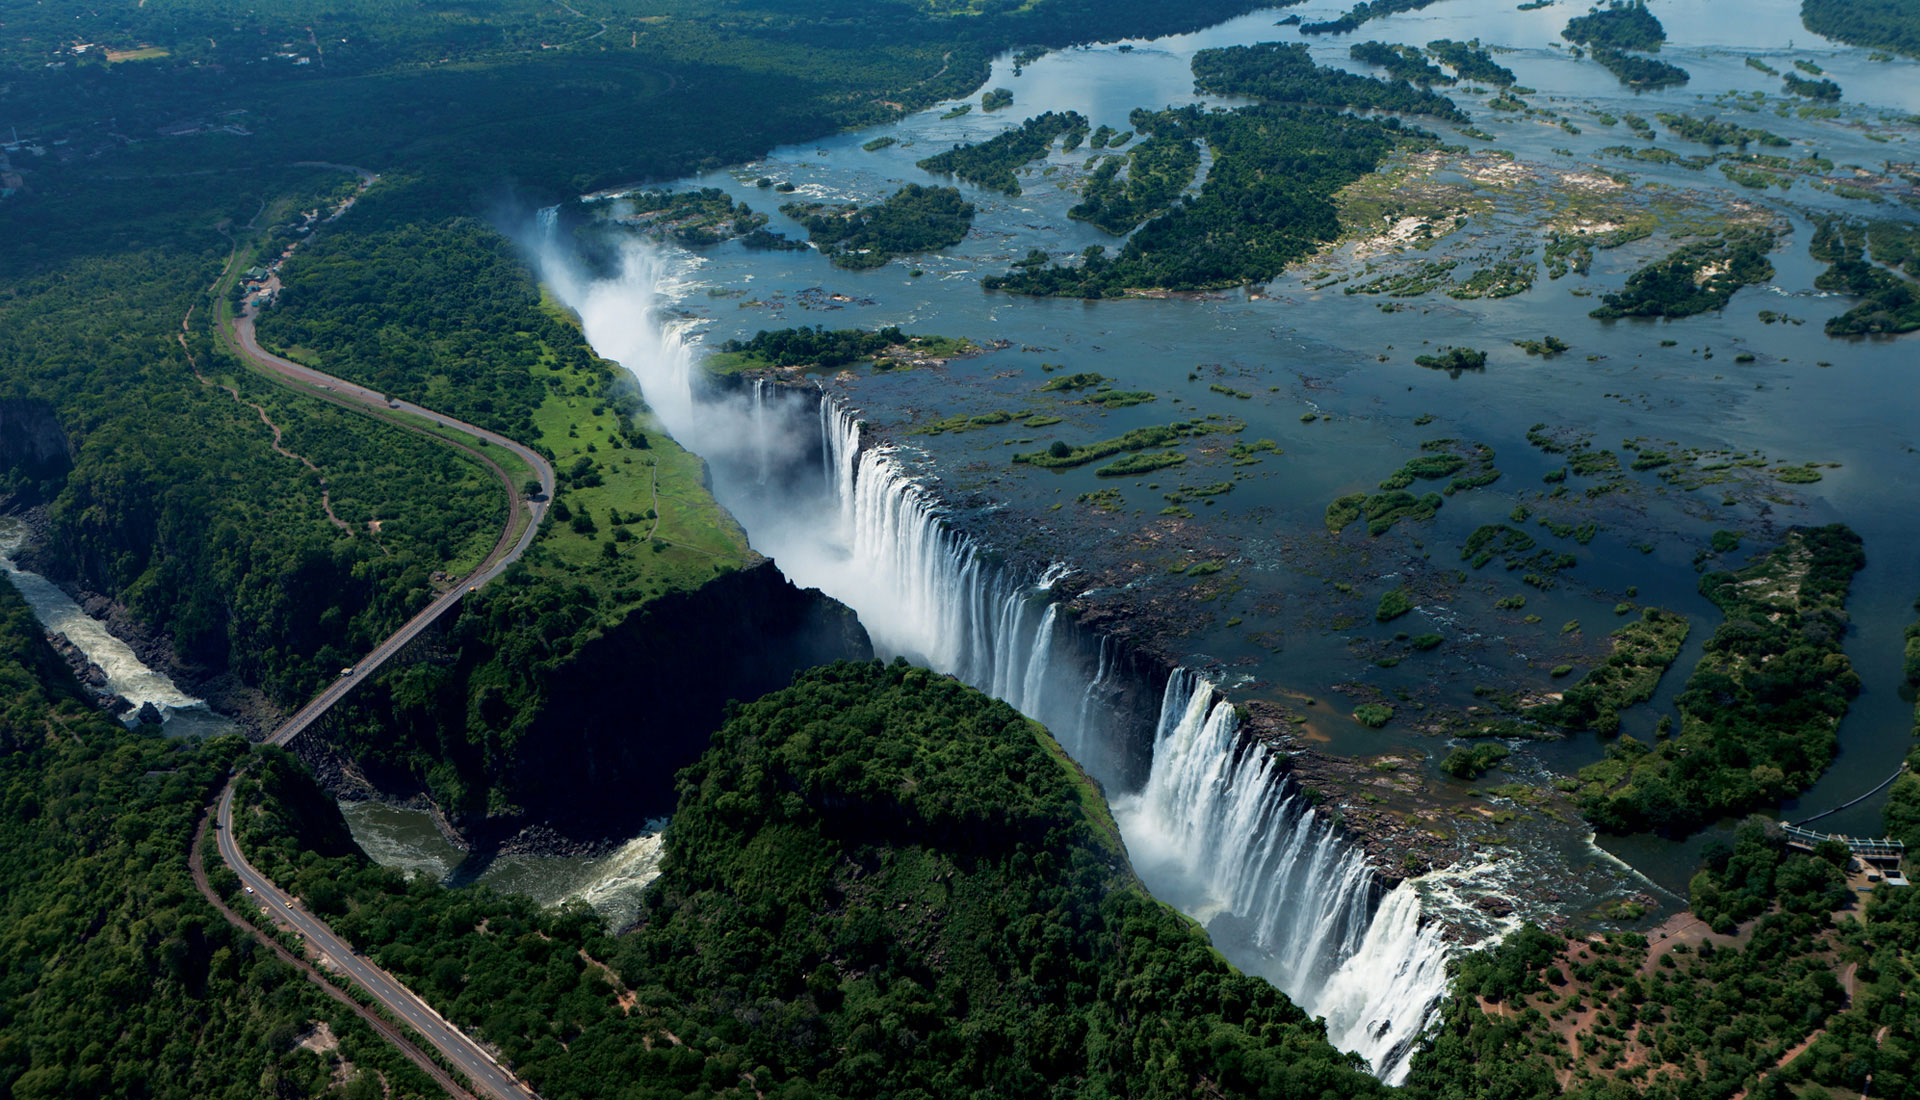 Victoria Falls, The Widest Waterfall in The World - Traveldigg.com